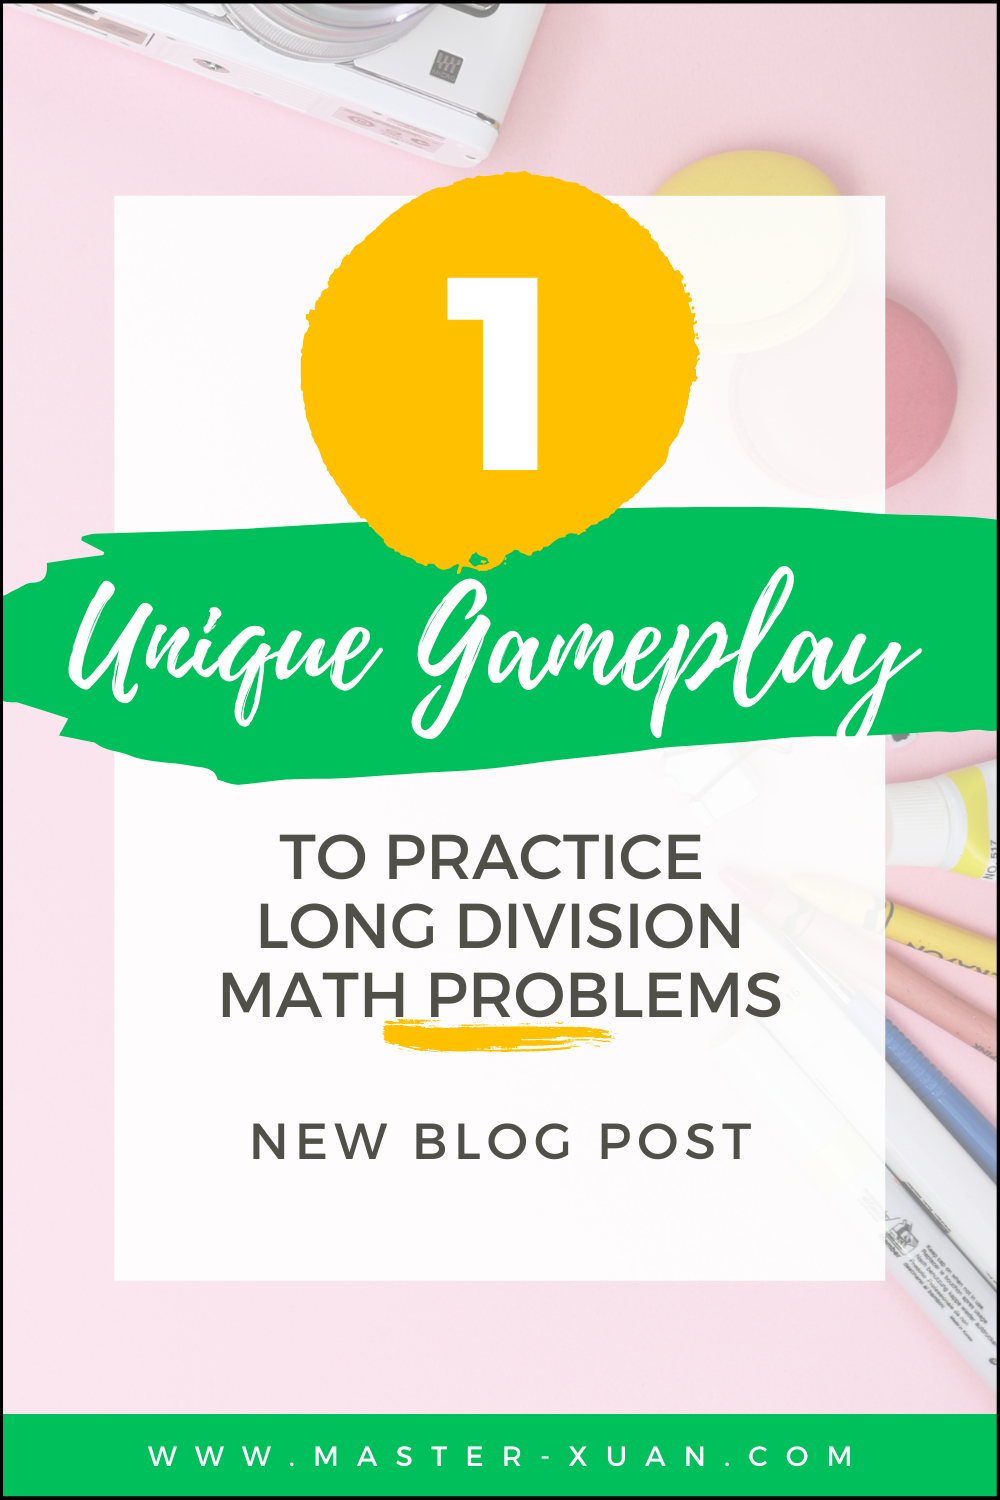 the one unique gameplay to practice long division math problems